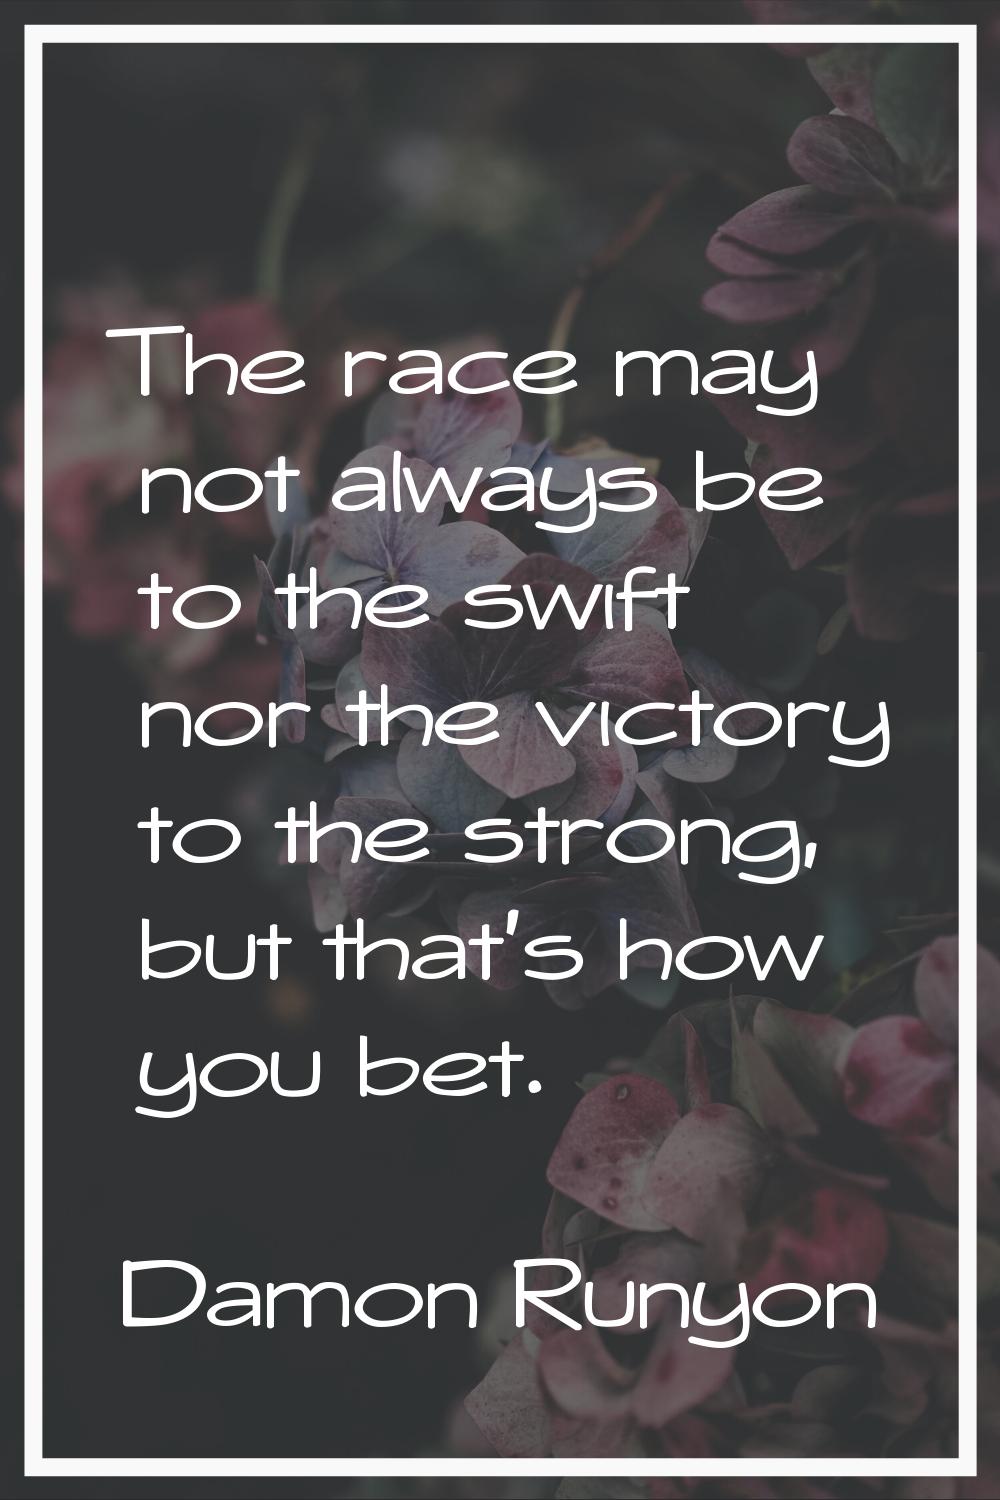 The race may not always be to the swift nor the victory to the strong, but that's how you bet.